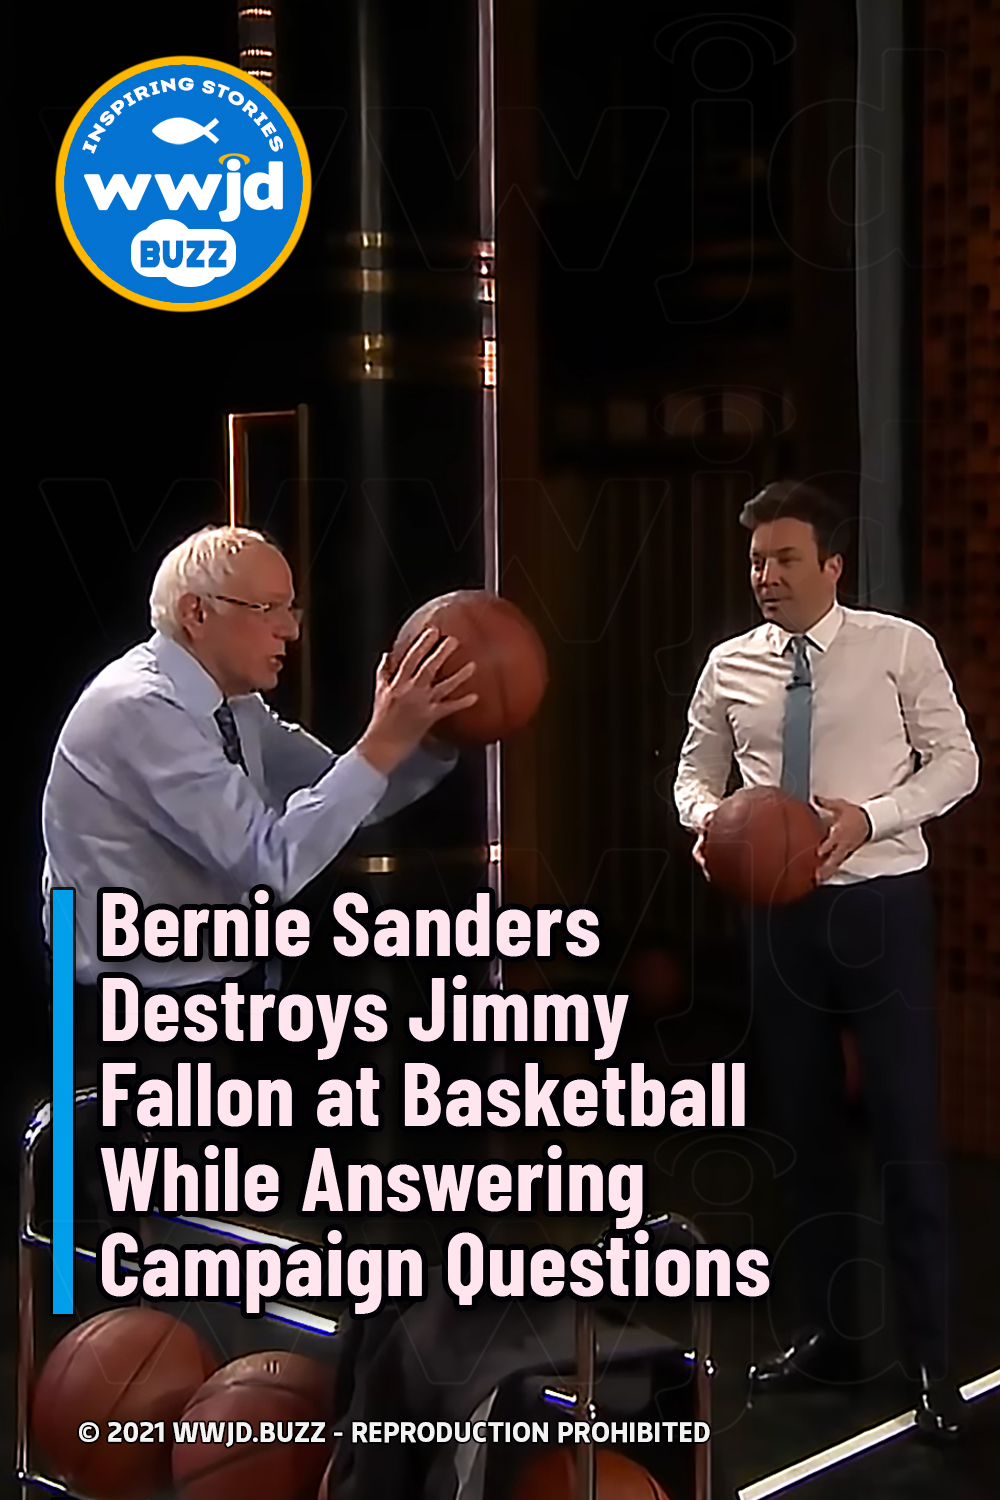 Bernie Sanders Destroys Jimmy Fallon at Basketball While Answering Campaign Questions